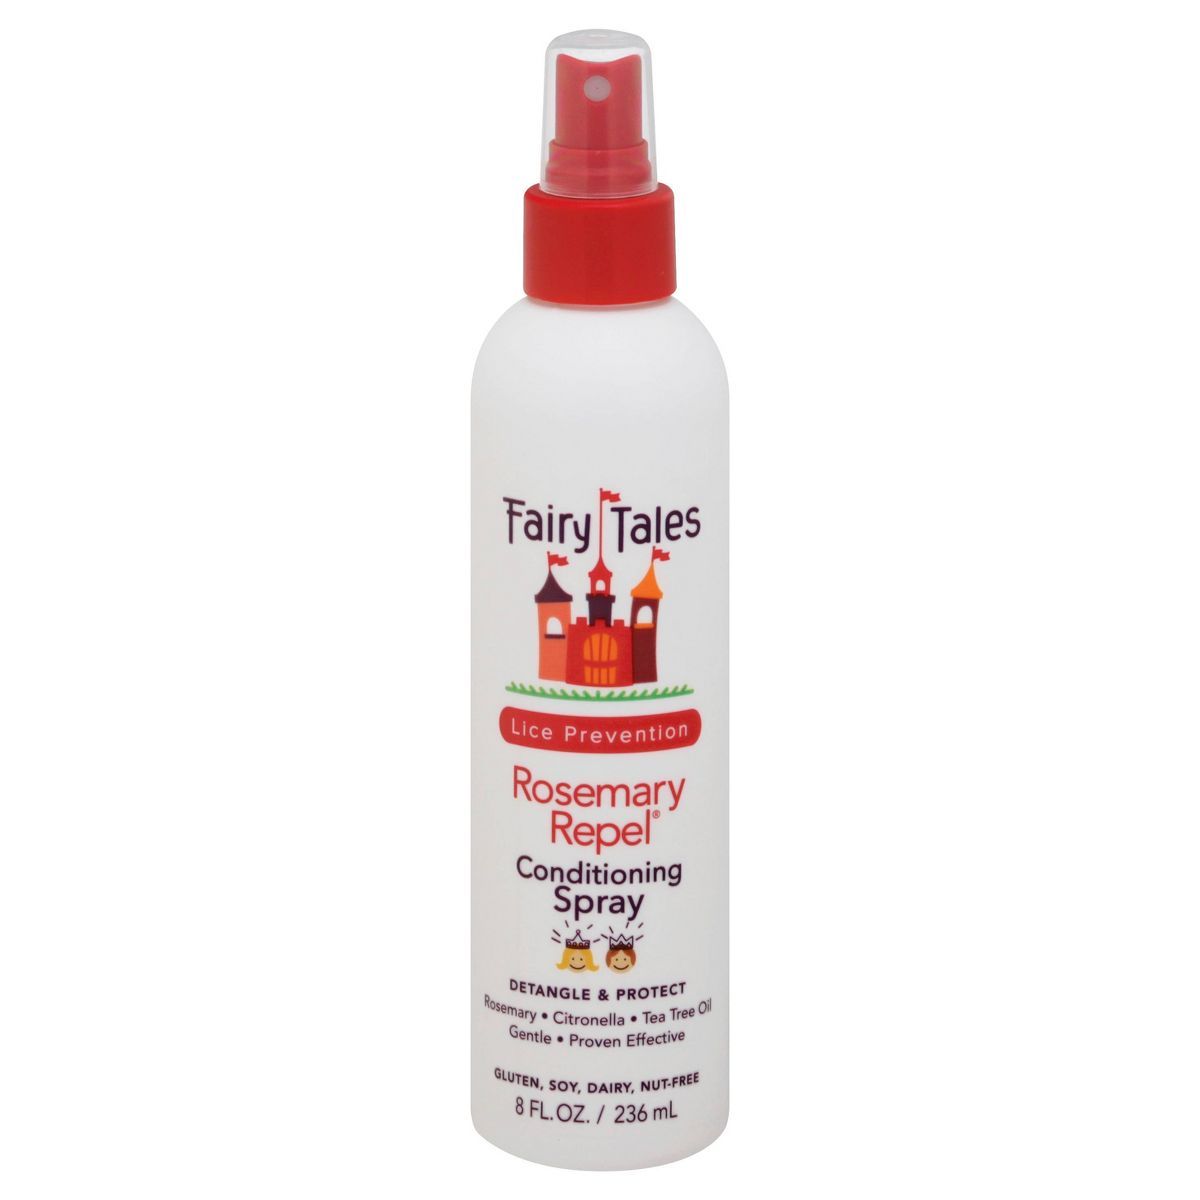 Fairy Tales Rosemary Repel Lice Prevention Conditioning Spray - 8 fl oz | Target